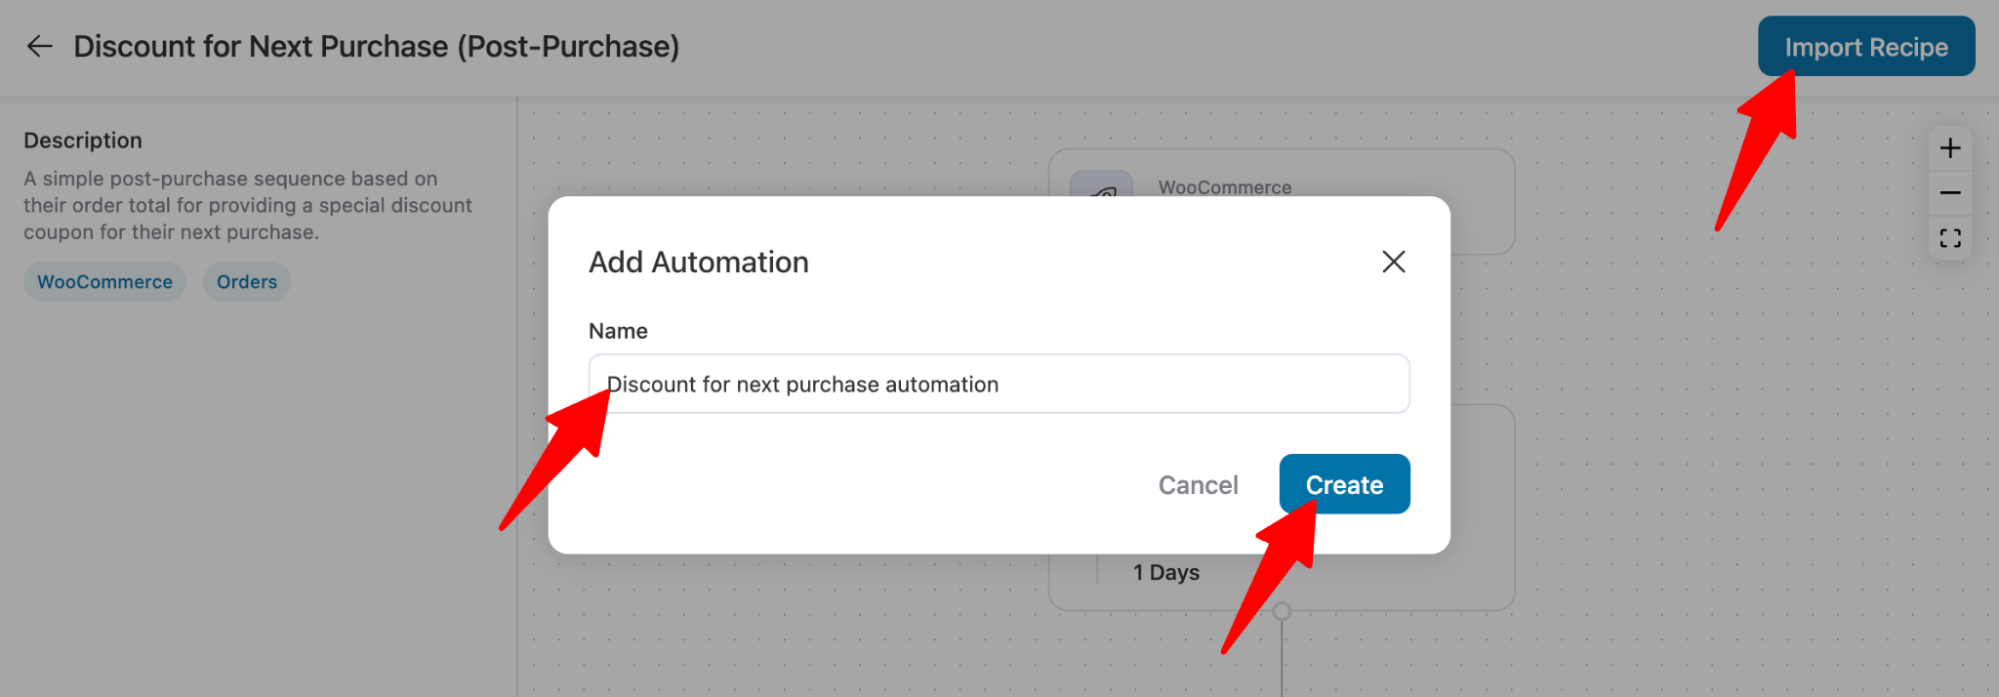 import discount for next purchase automation